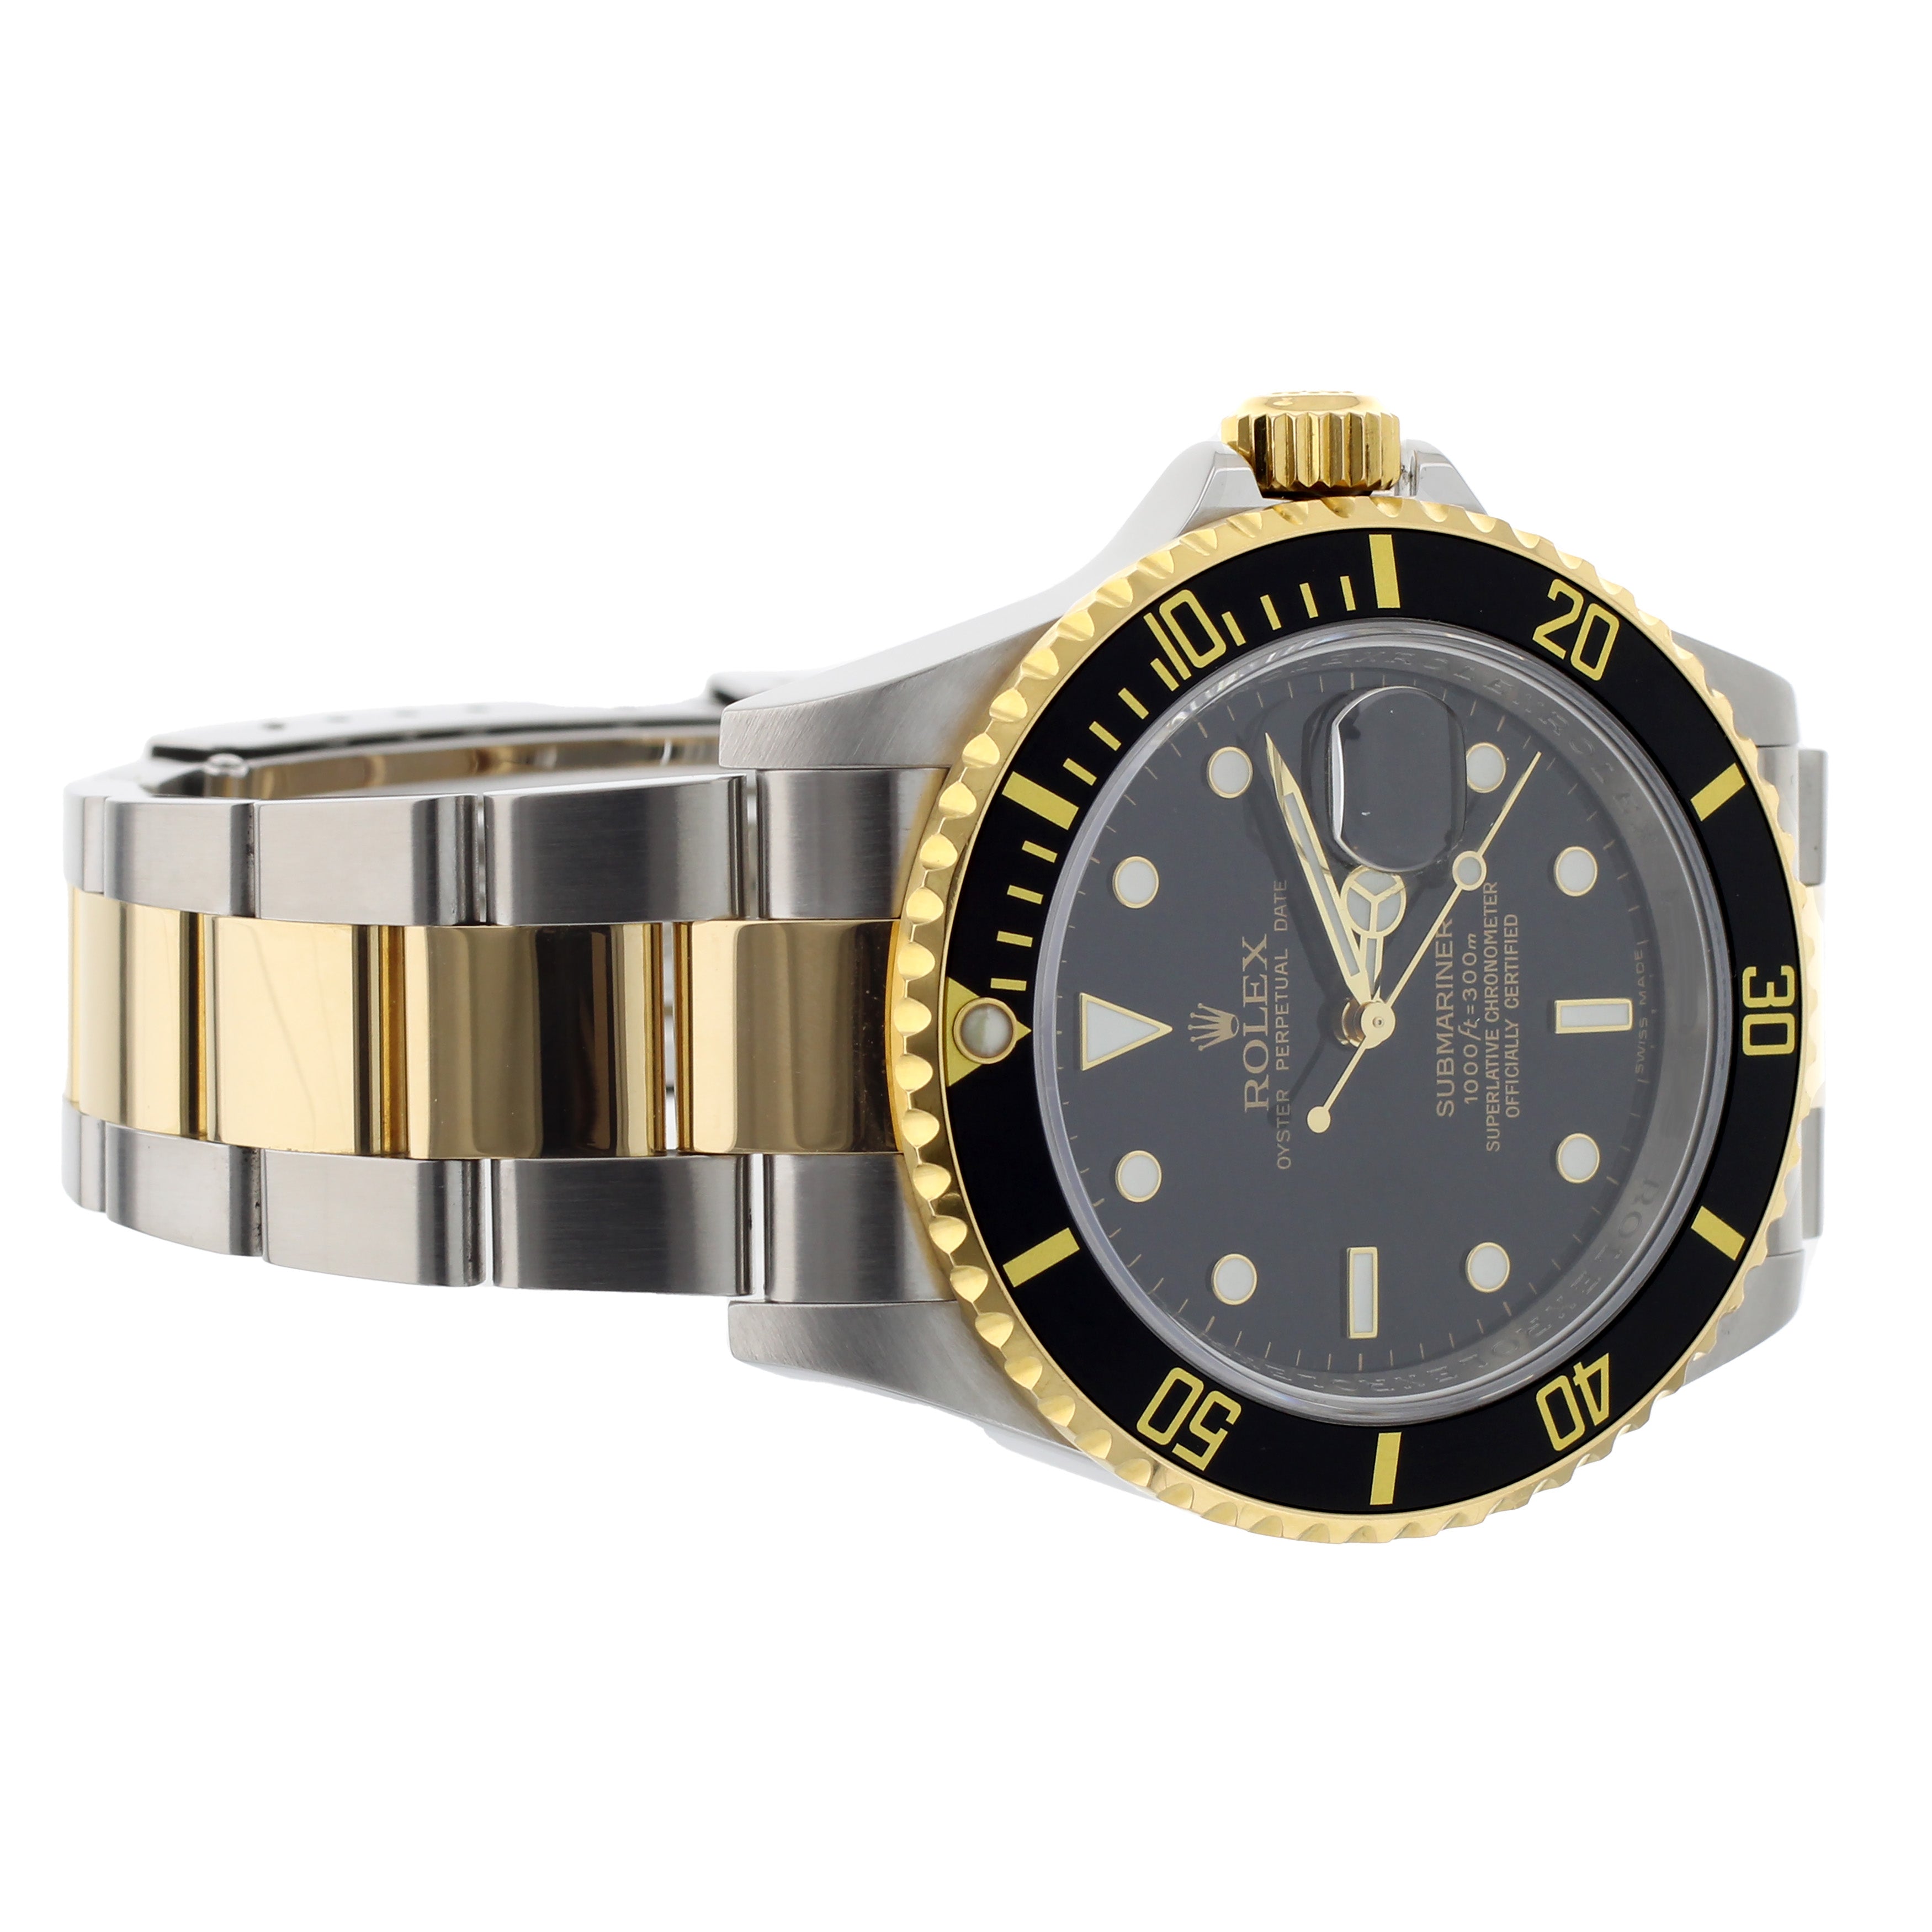 Rolex Submariner Stainless Steel Yellow Gold Black Dial on Bracelet 40mm 16613LN